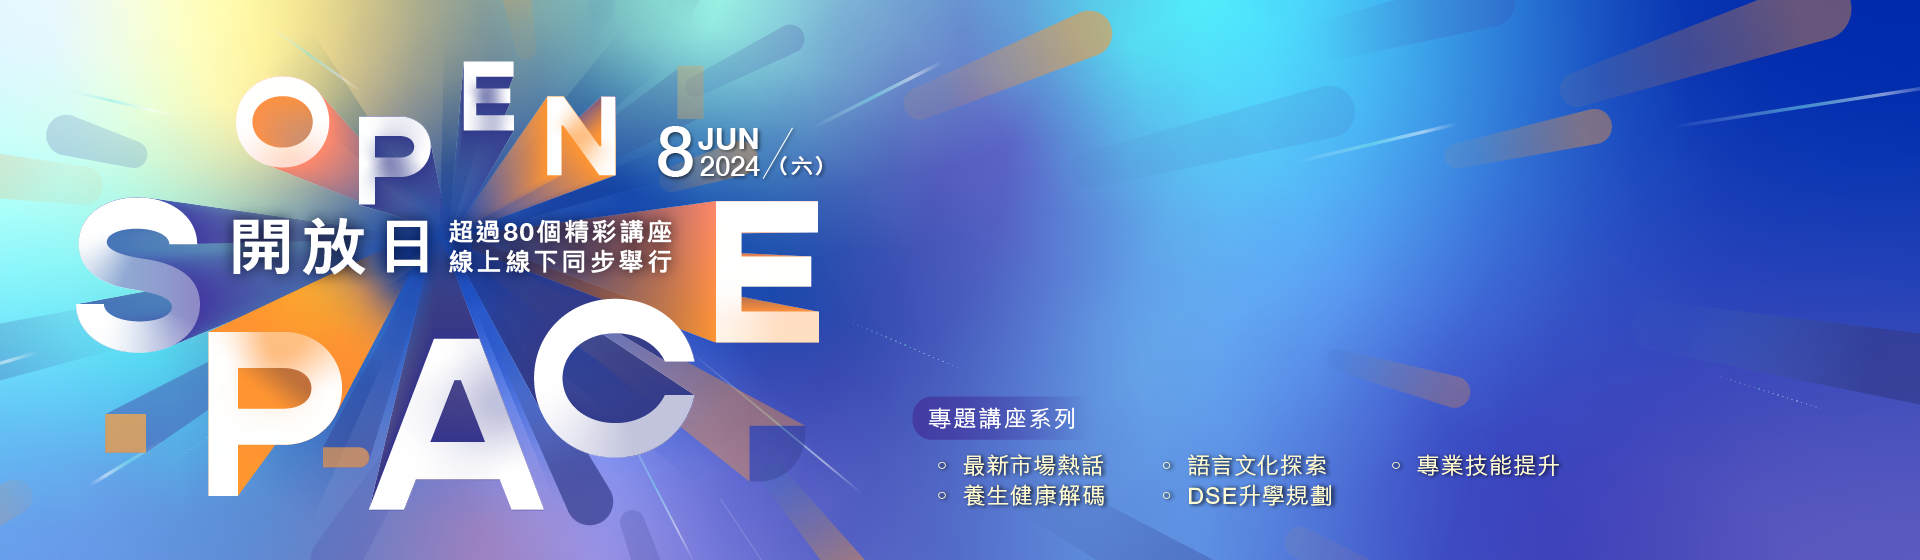 HKU SPACE OPEN SPACE 8 JUN 2024 Saturday With over 80 engaging talks spanning a variety of subjects